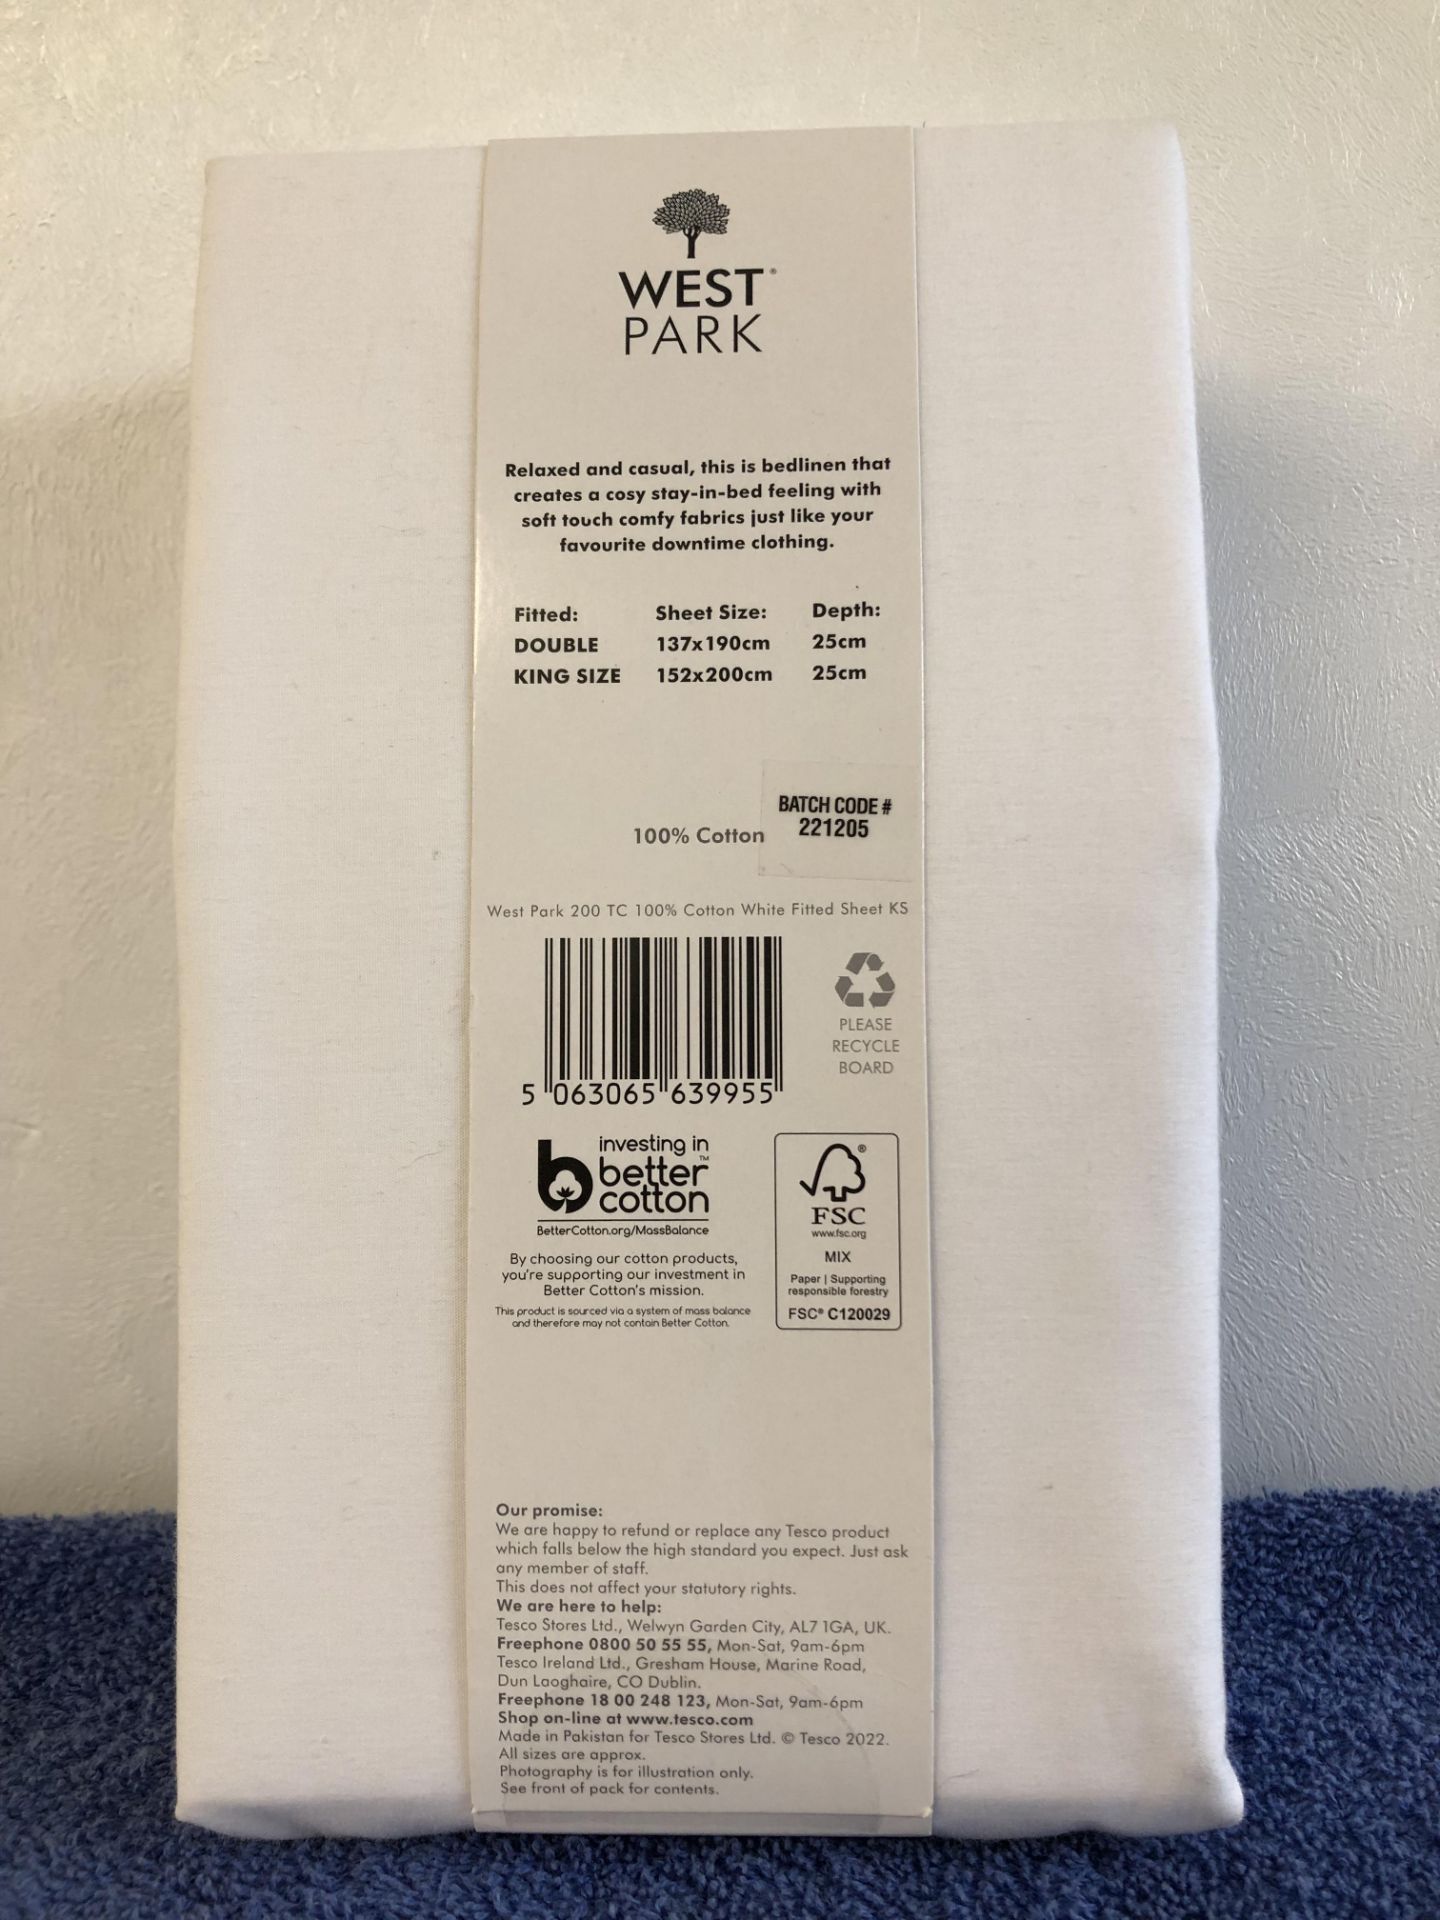 6 KING SIZE WHITE COTTON 200 THREAD COUNT FITTED SHEETS 152 X 200 X 25CM BY WEST PARK RRP £18. - Image 2 of 2